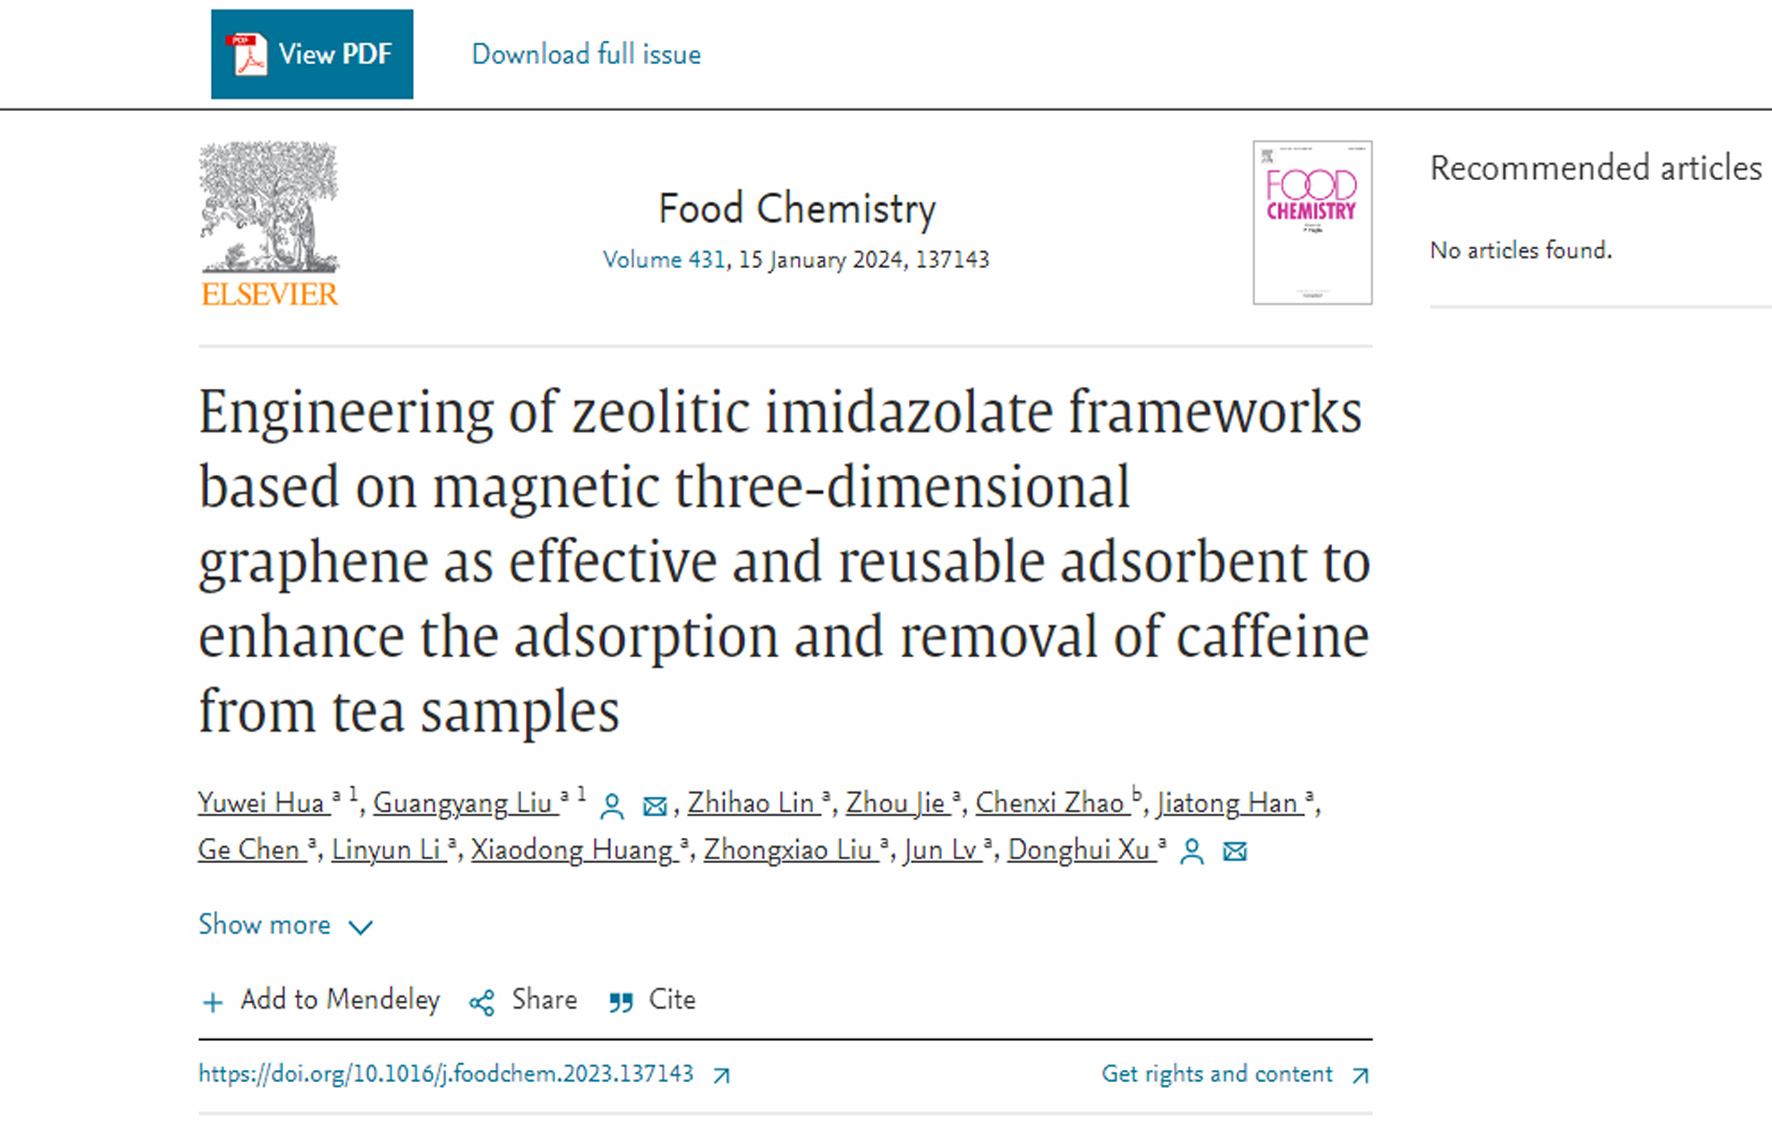 Quality and safety group research constructs a new method for efficient caffeine enrichment in tea